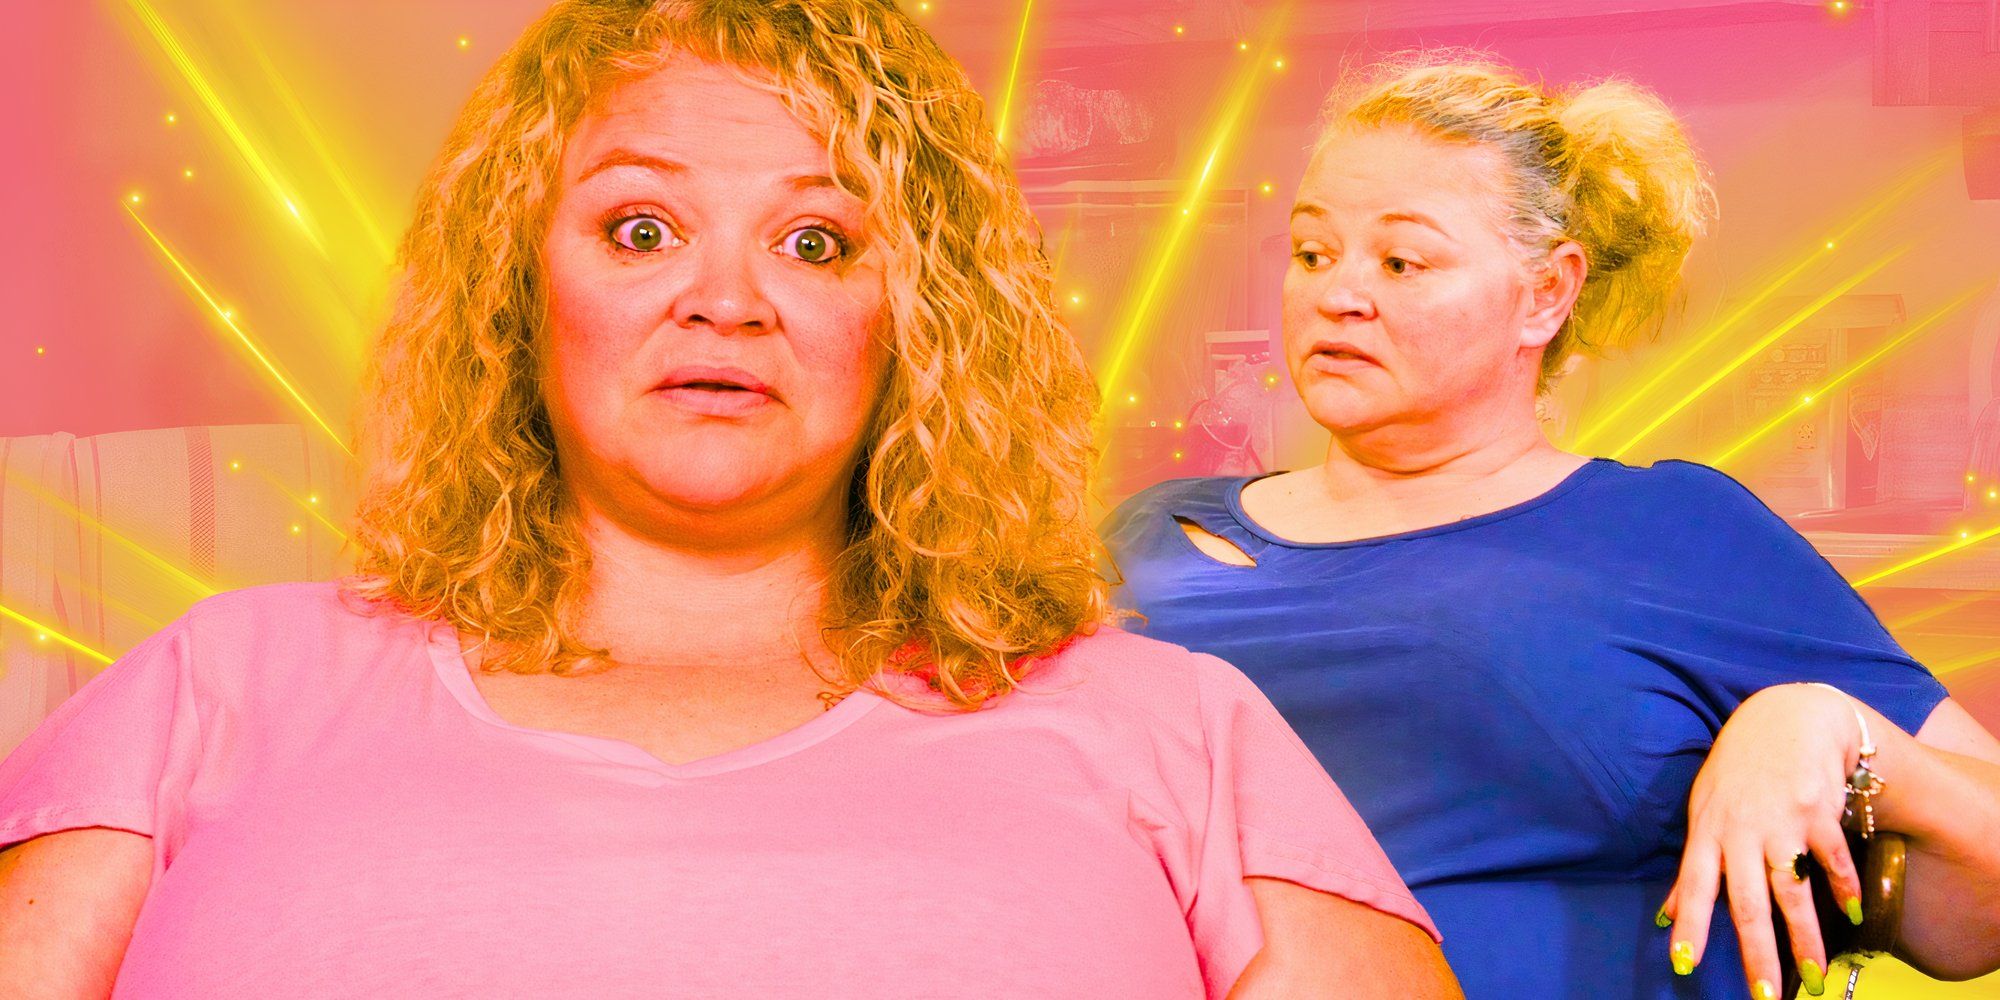 1000 lb sisters star amanda halterman in montage featuring two different expressions and a yellow and pink background